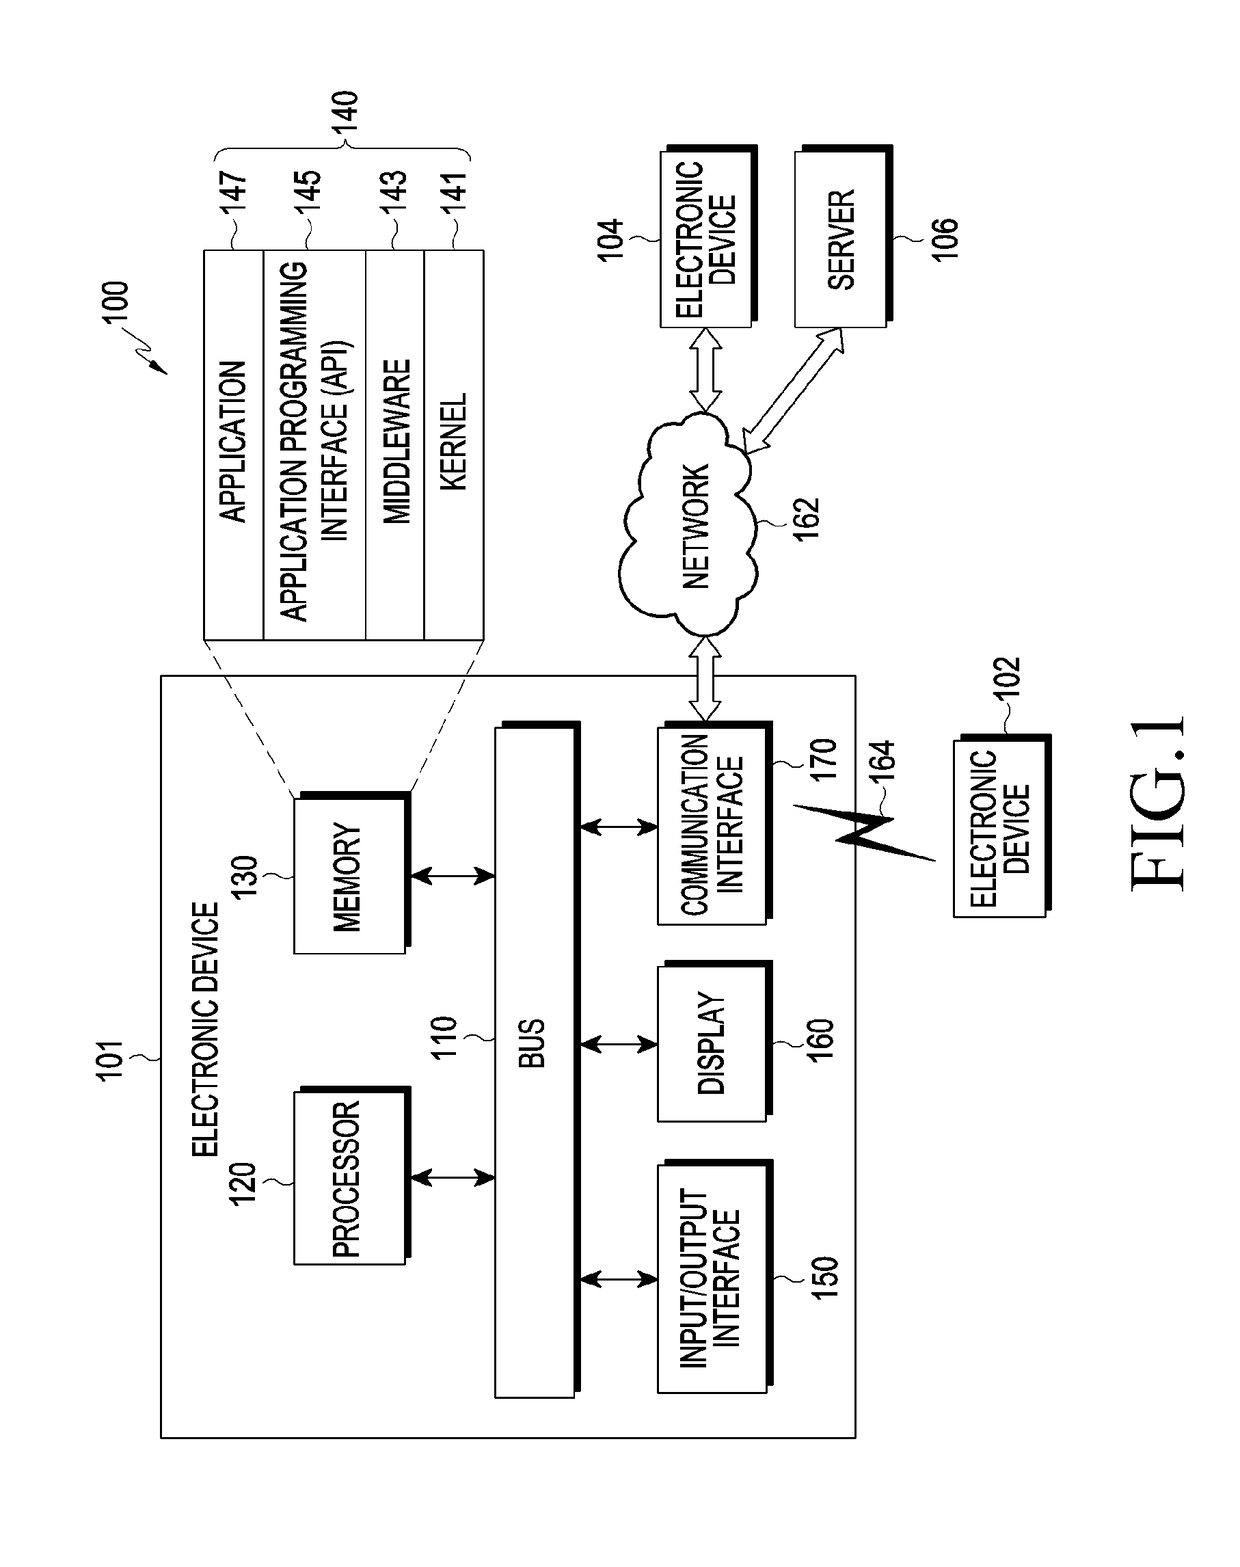 Electronic device for determining biometric information and method of operating same